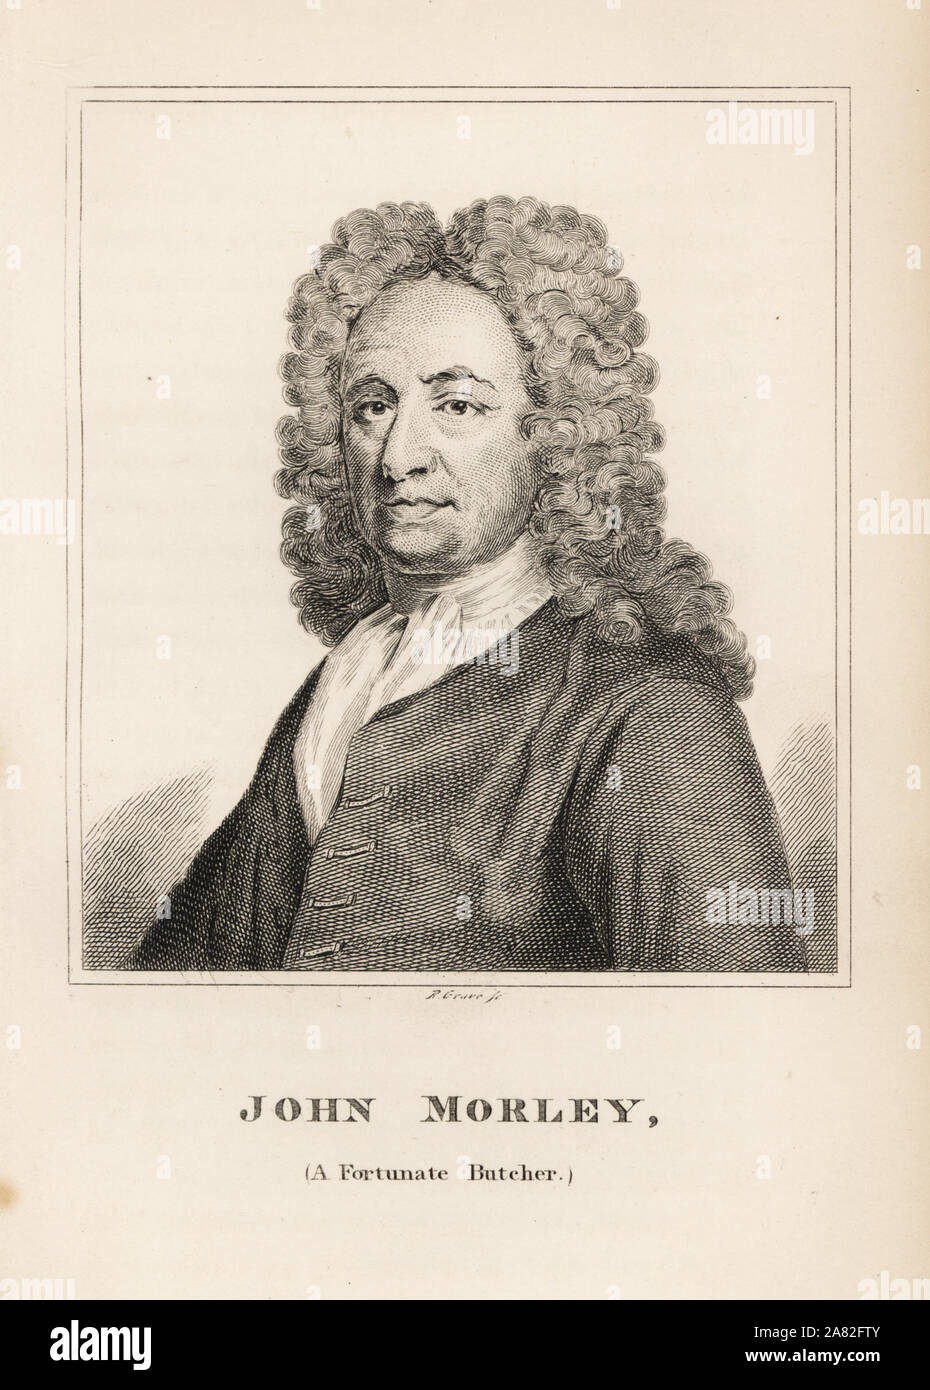 John 'Carcase' Morley, a fortunate butcher, rascal and real-estate dealer, died 1732. Engraving by R. Grave from James Caulfield's Portraits, Memoirs and Characters of Remarkable Persons, London, 1819. Stock Photo